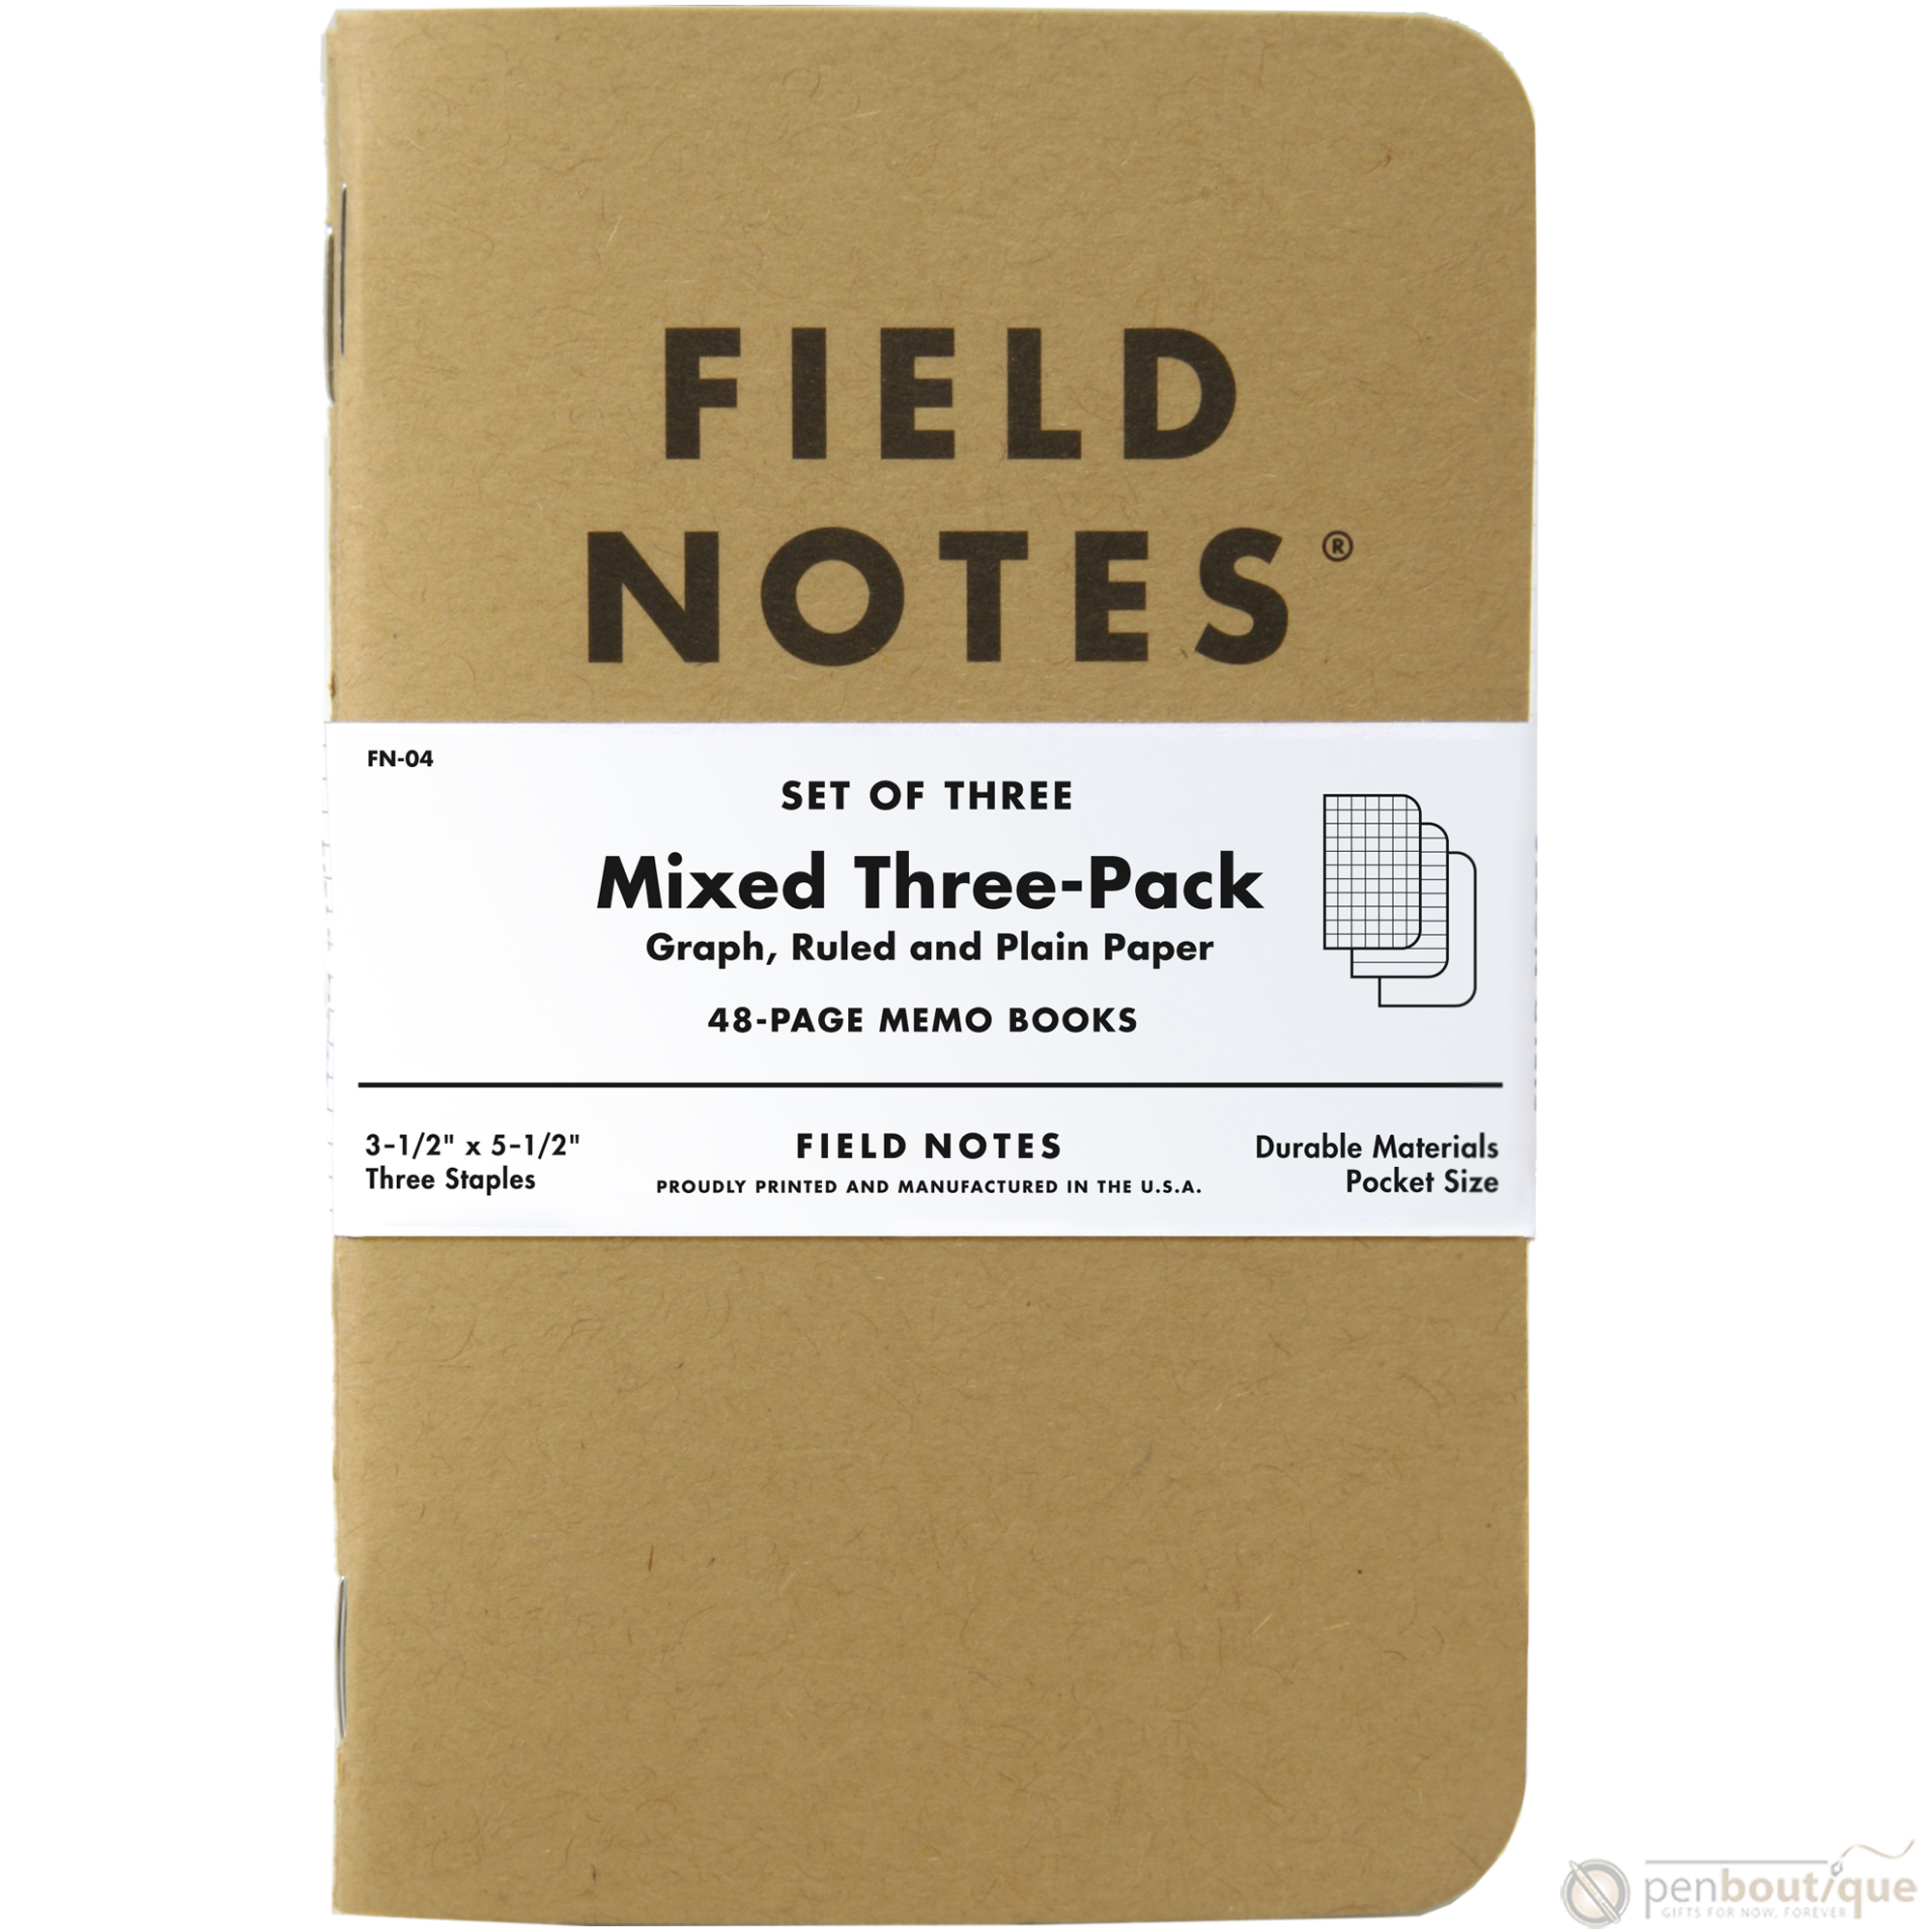 Field Notes - Pitch Black Memo Book (3-pack) Ruled